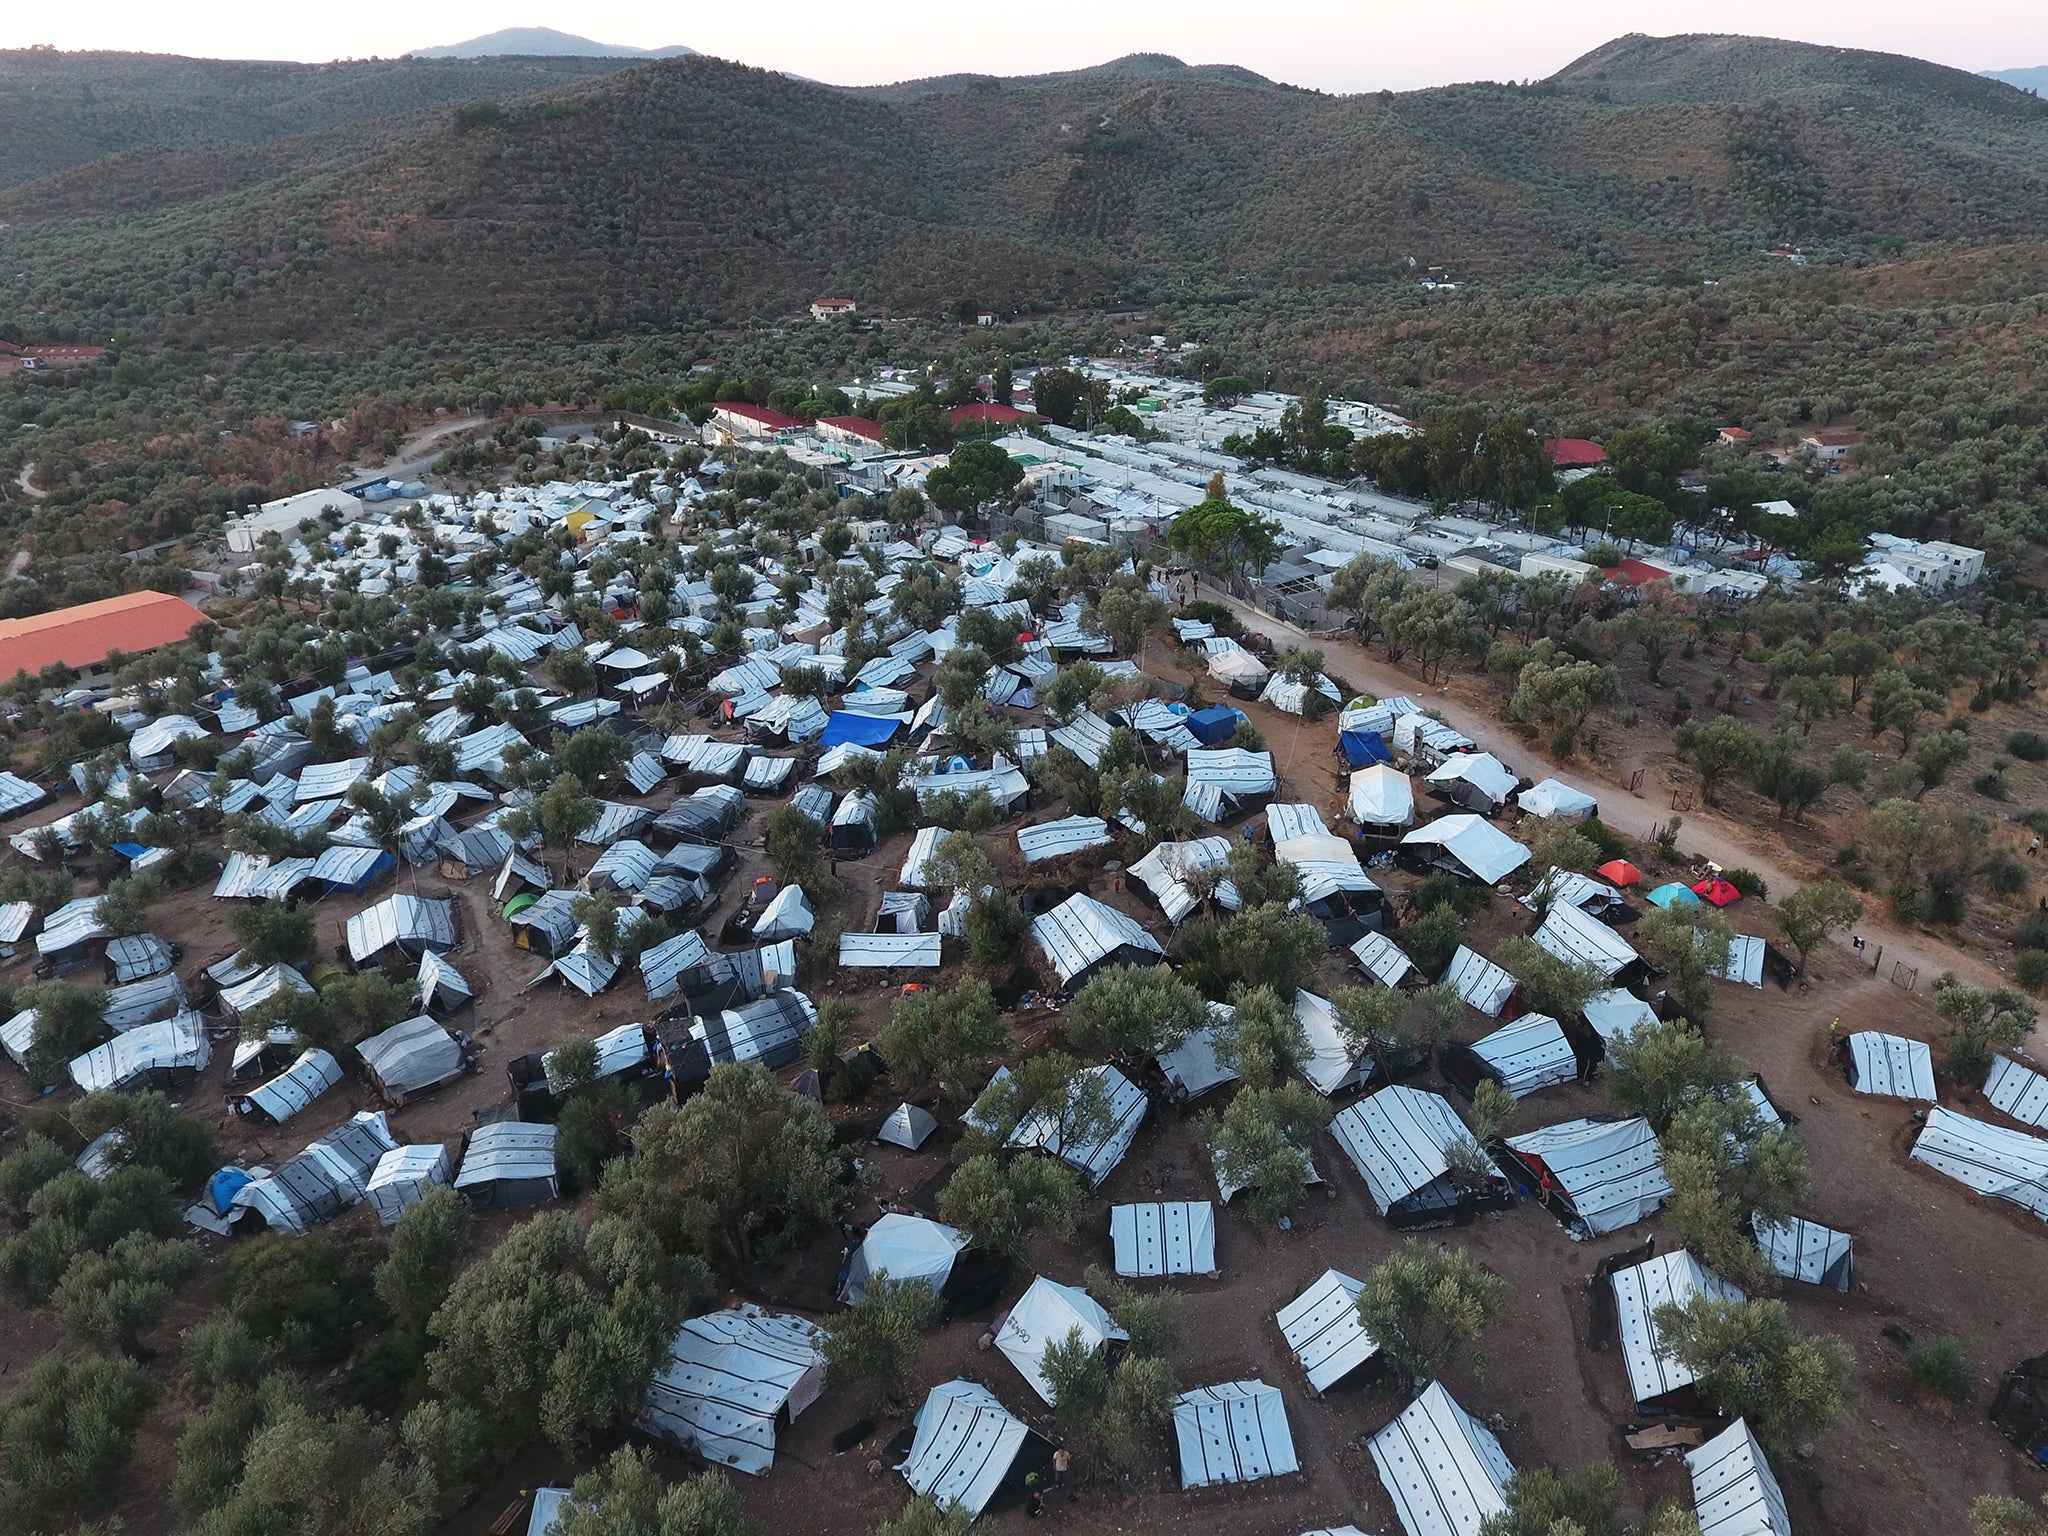 Conditions in the camp are likely to decline further